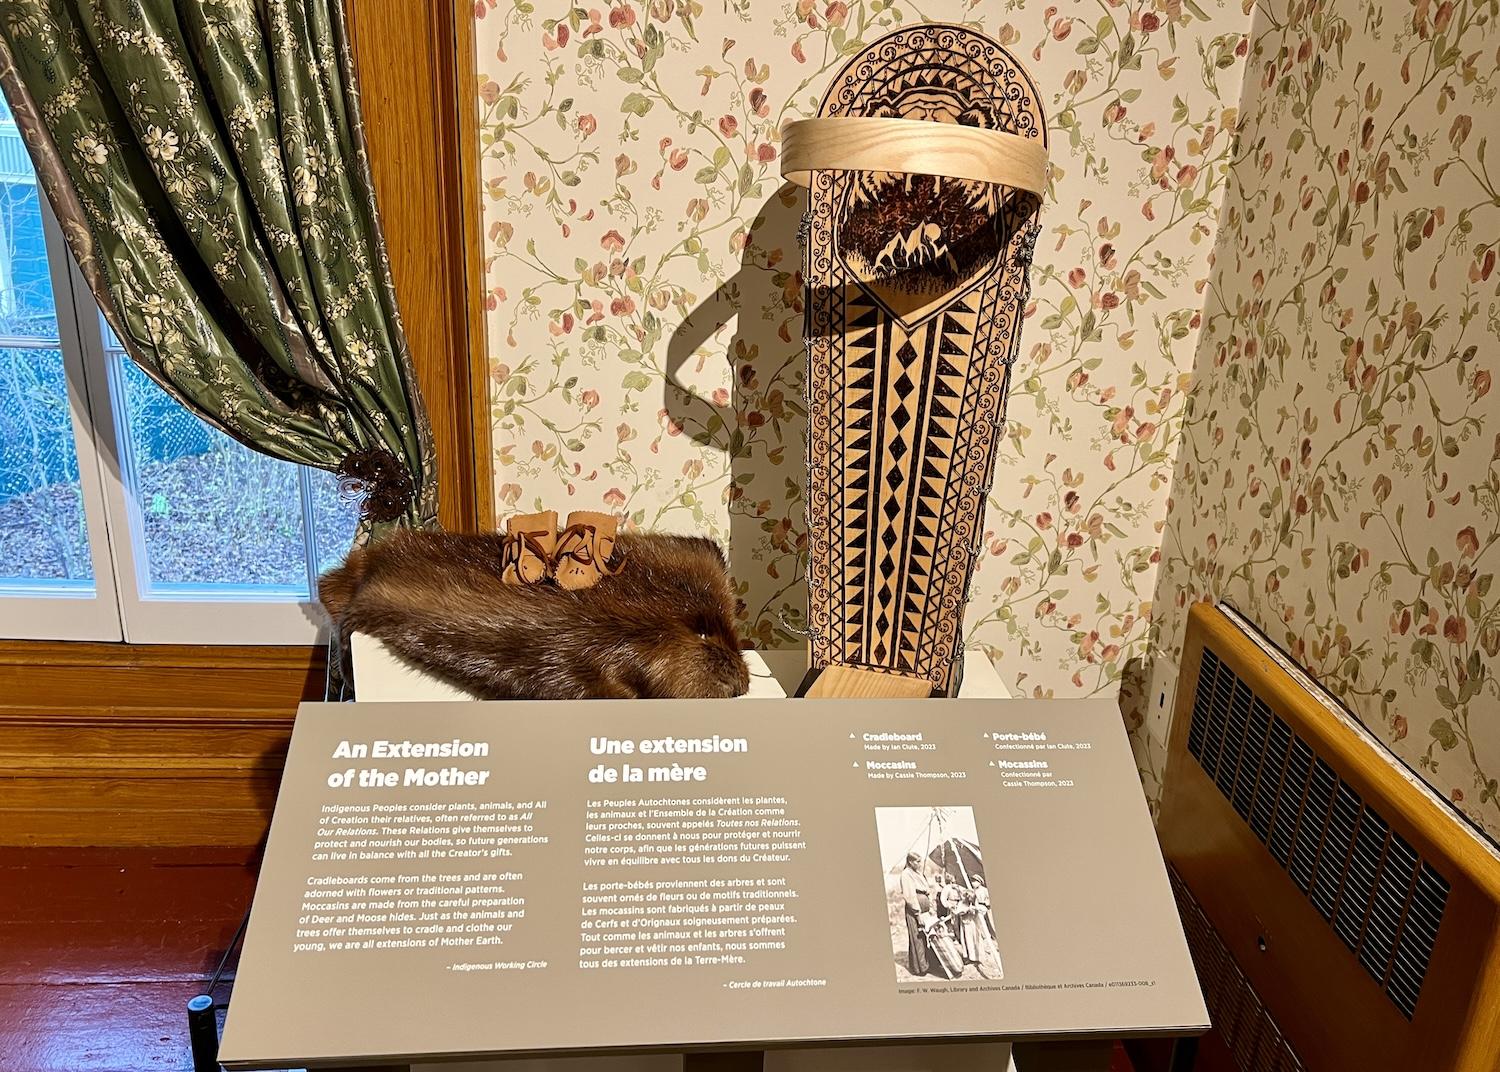 In the nursery, a wooden cradleboard, baby moccasins and a beaver pelt speak to the way that Indigenous Peoples consider plants, animals and "All of Creation" to be relatives. 